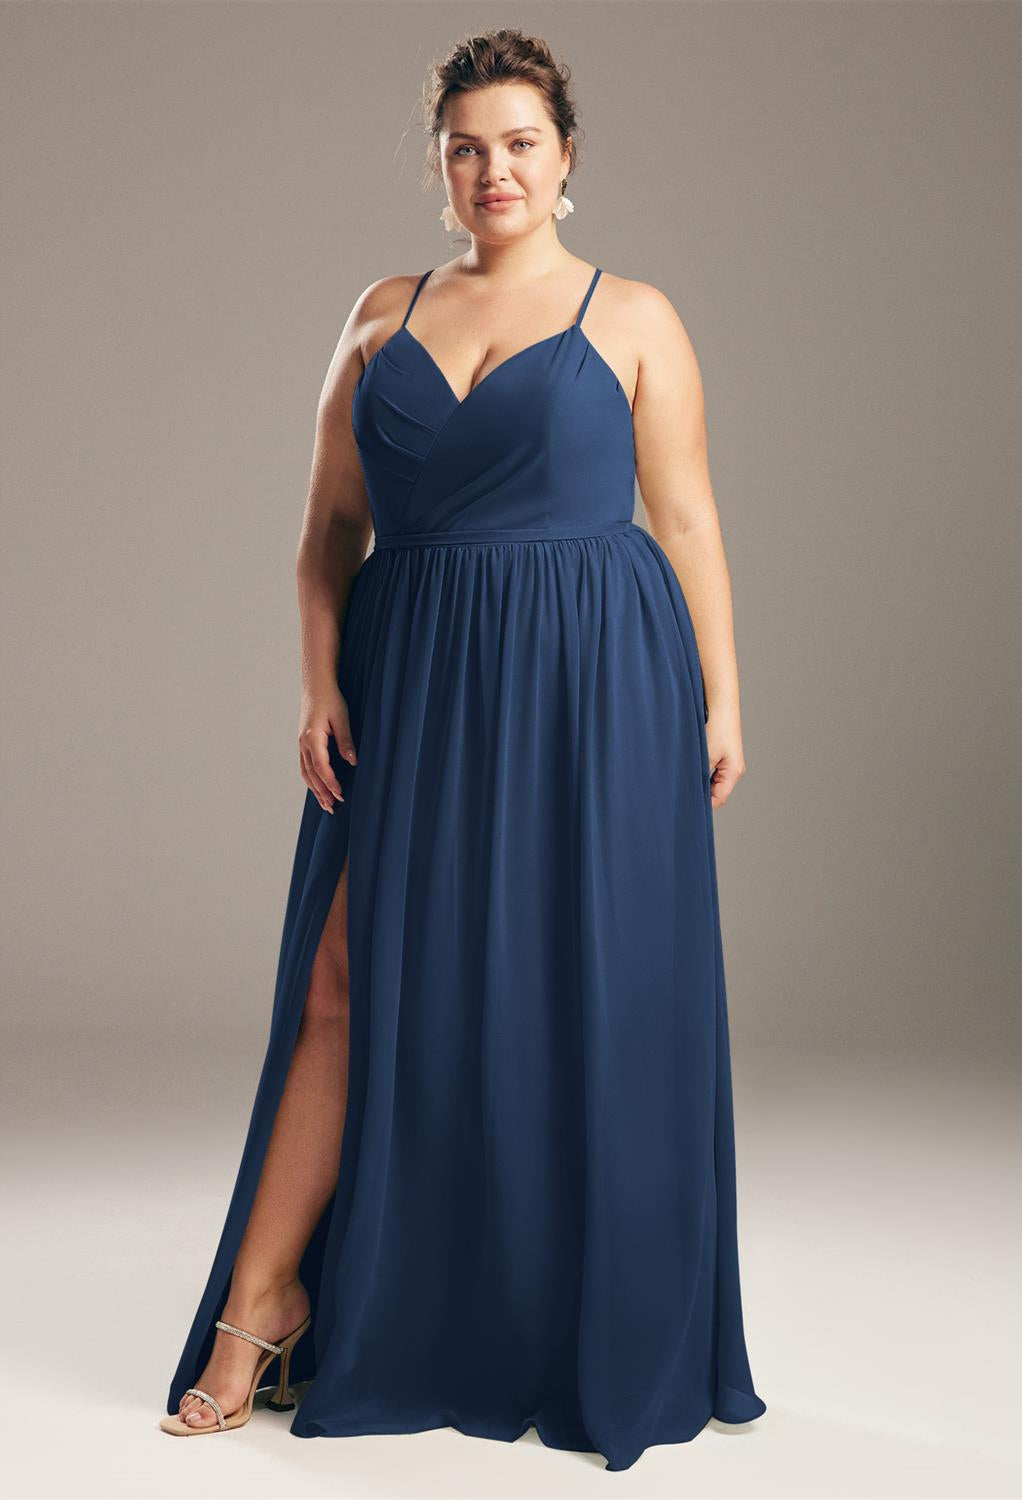 A woman in a blue Wilfreda Chiffon Bridesmaid Dress - Off The Rack, standing confidently against a gray background, her hand resting on her hip, reminiscent of styles seen in Bergamot Bridal.